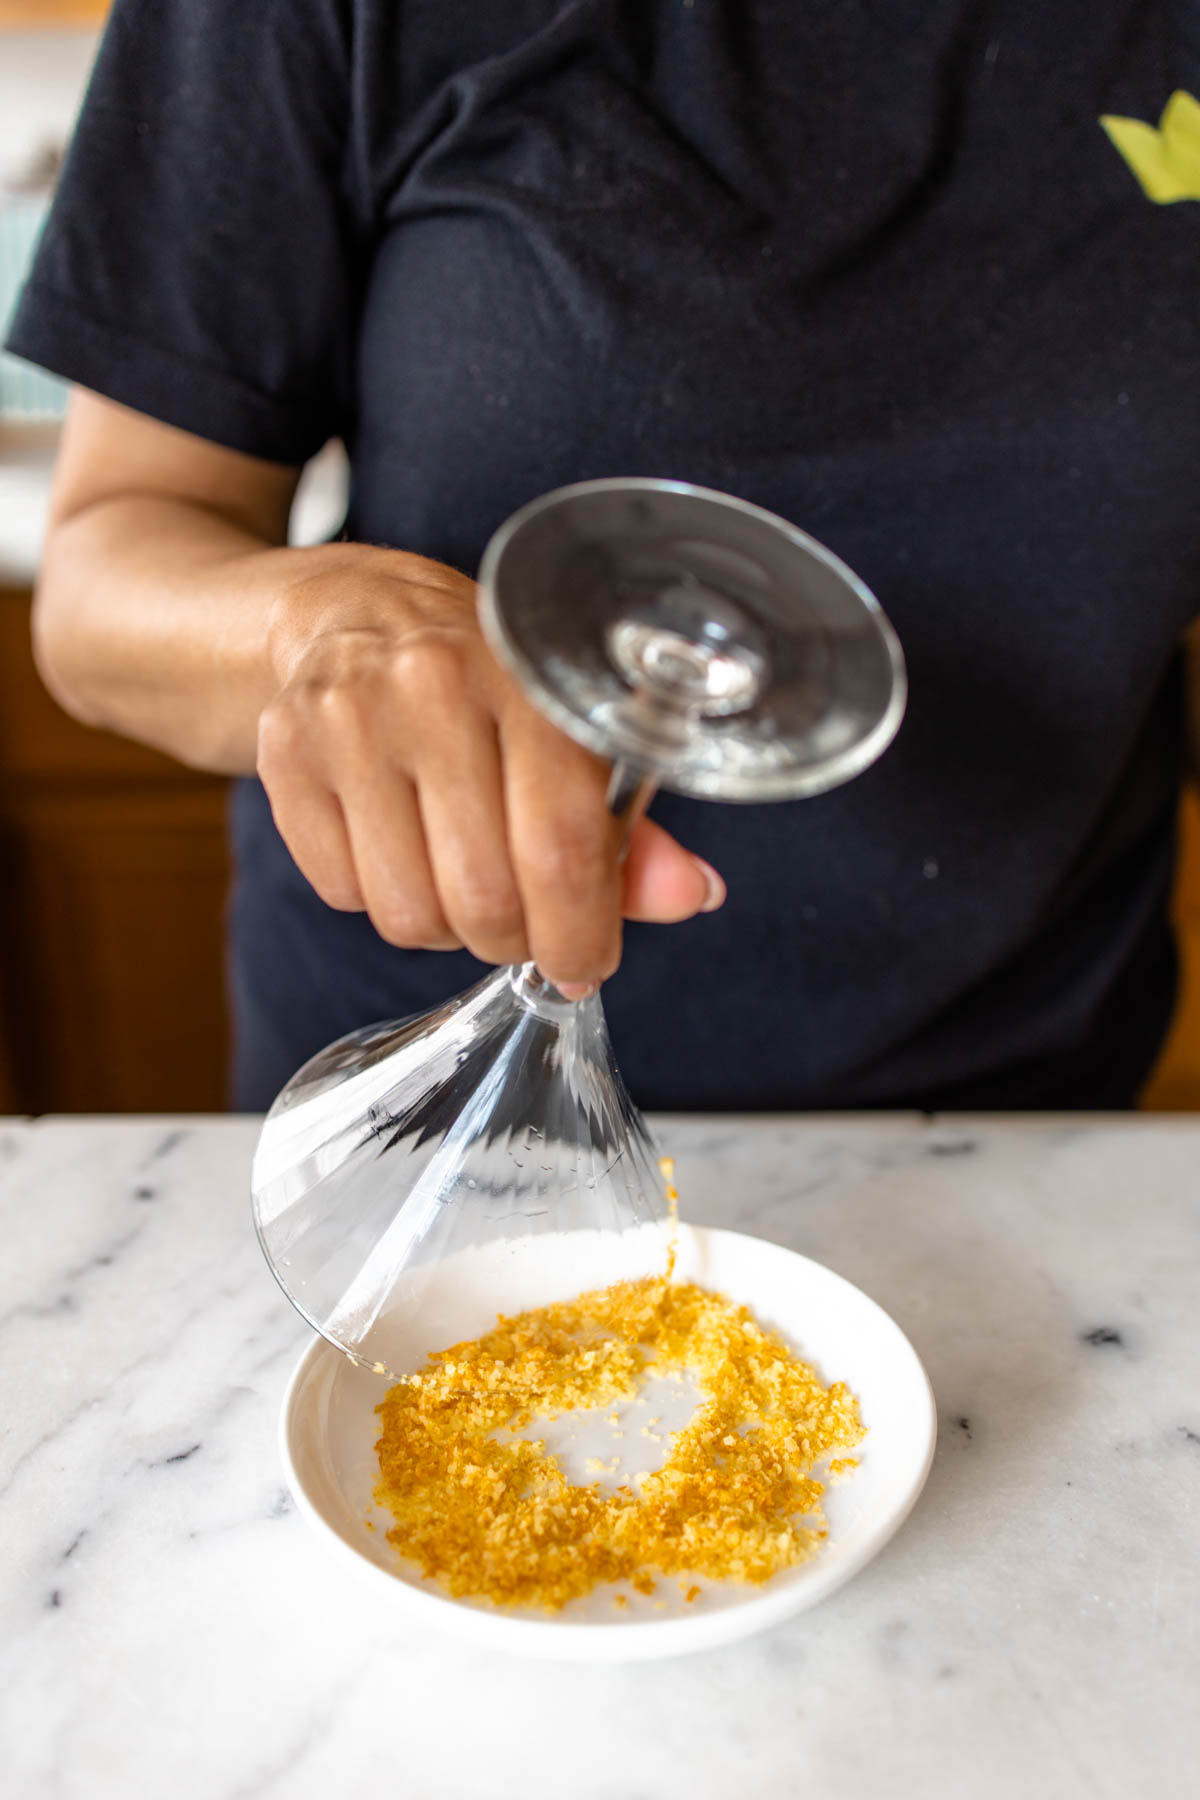 A person dipping a glass into a plate with orange salt.